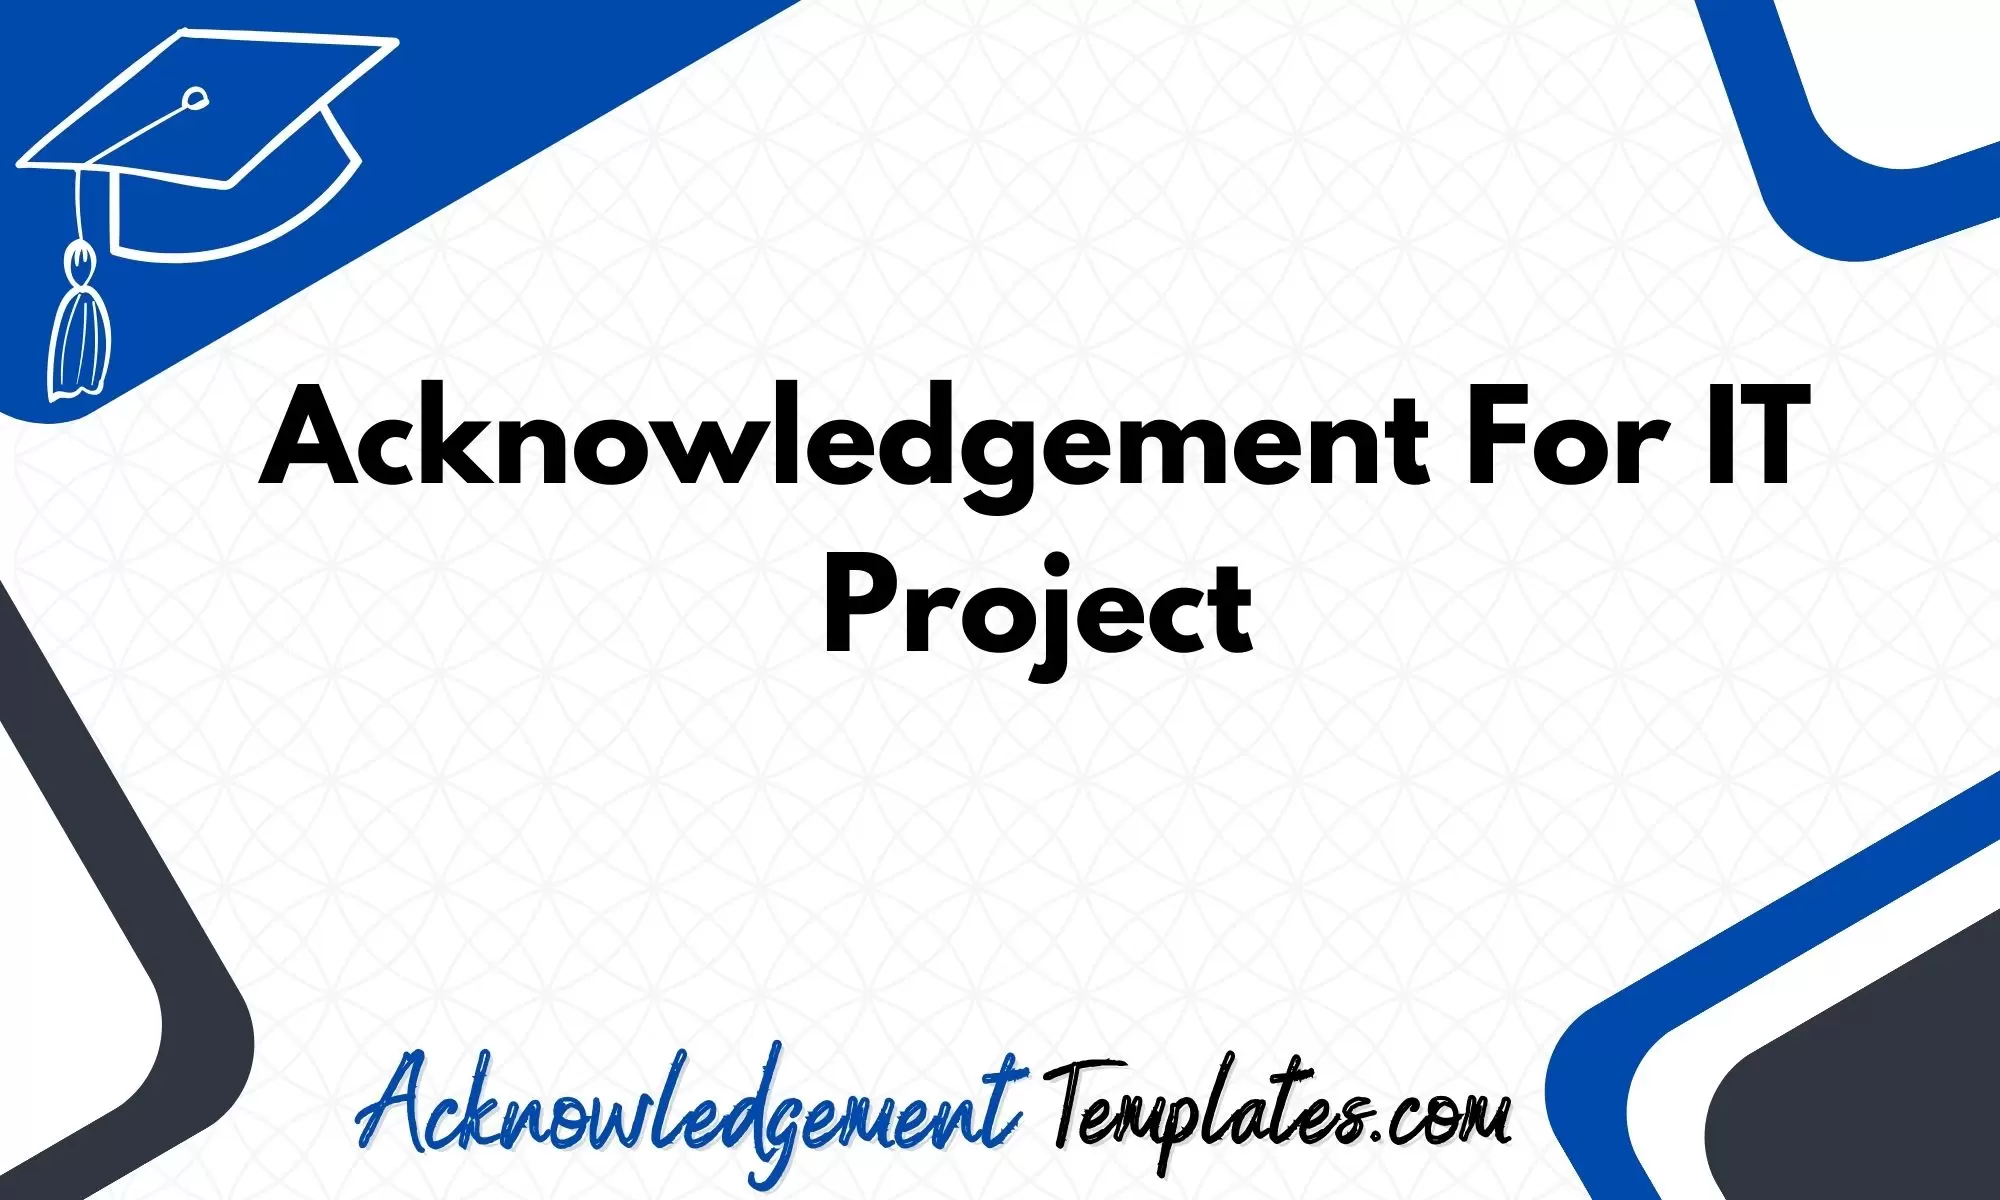 Acknowledgement For IT Project